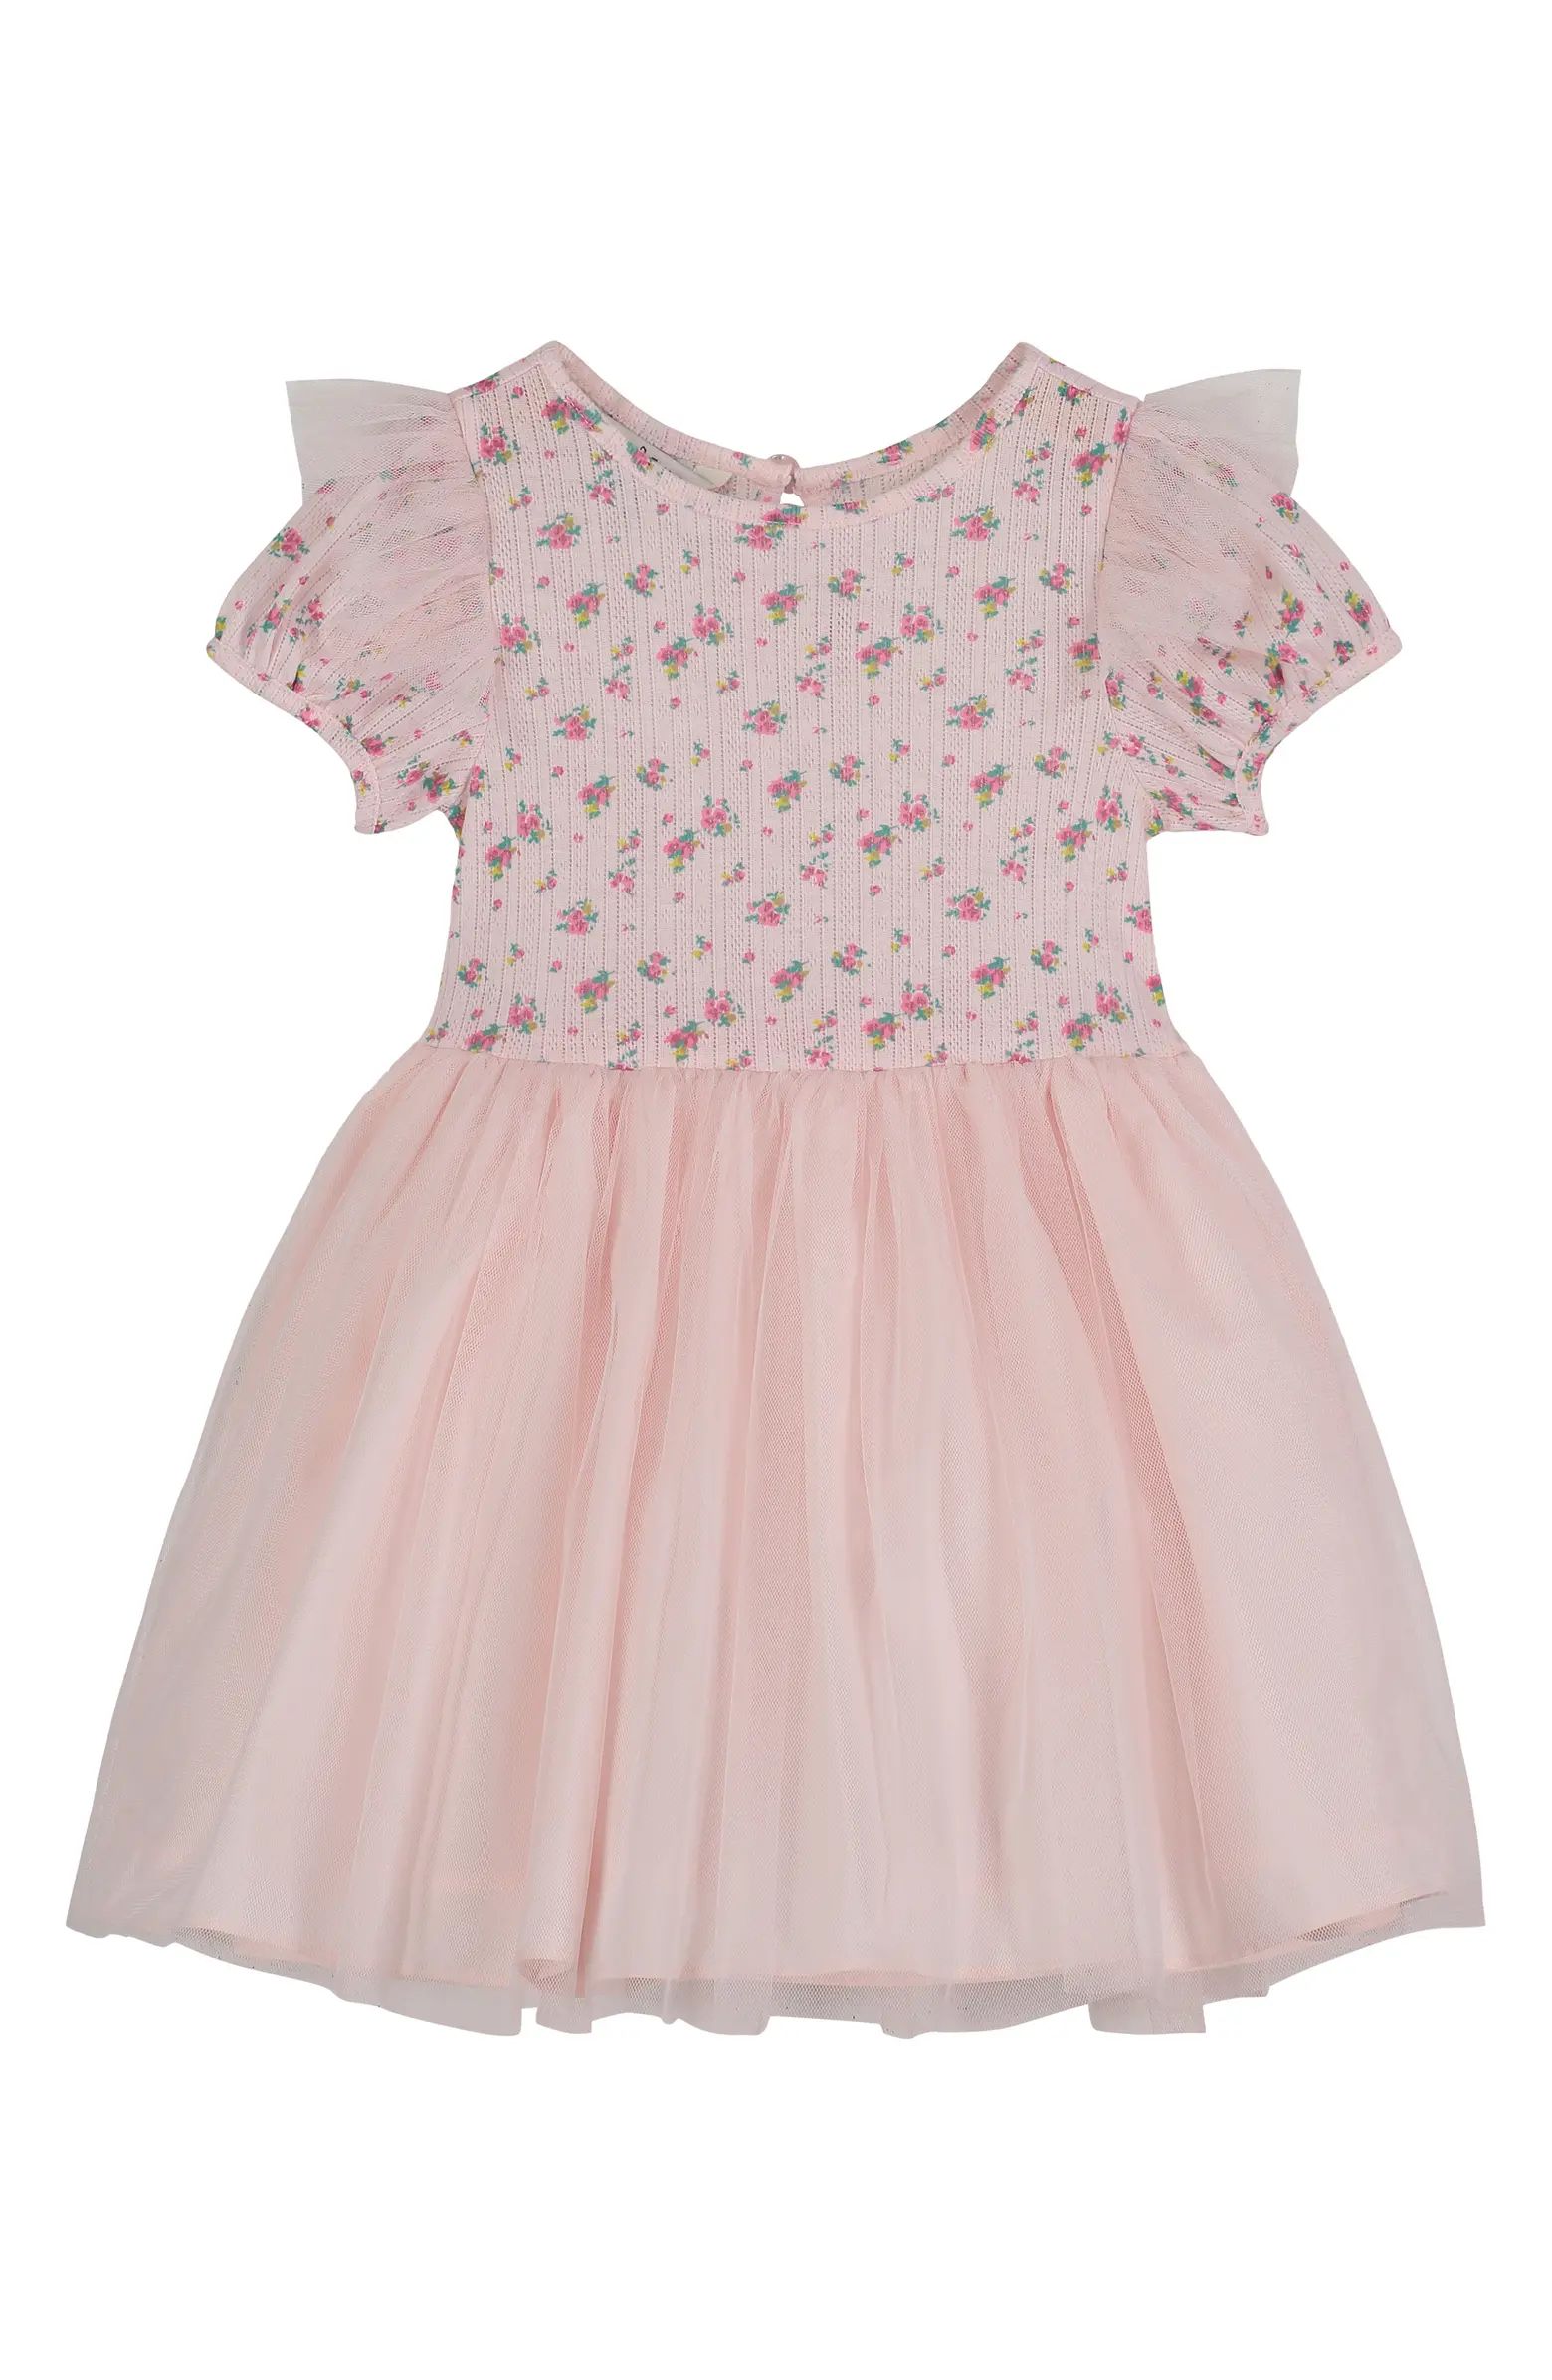 Kids' Floral Ruffle Fit & Flare Dress | Nordstrom